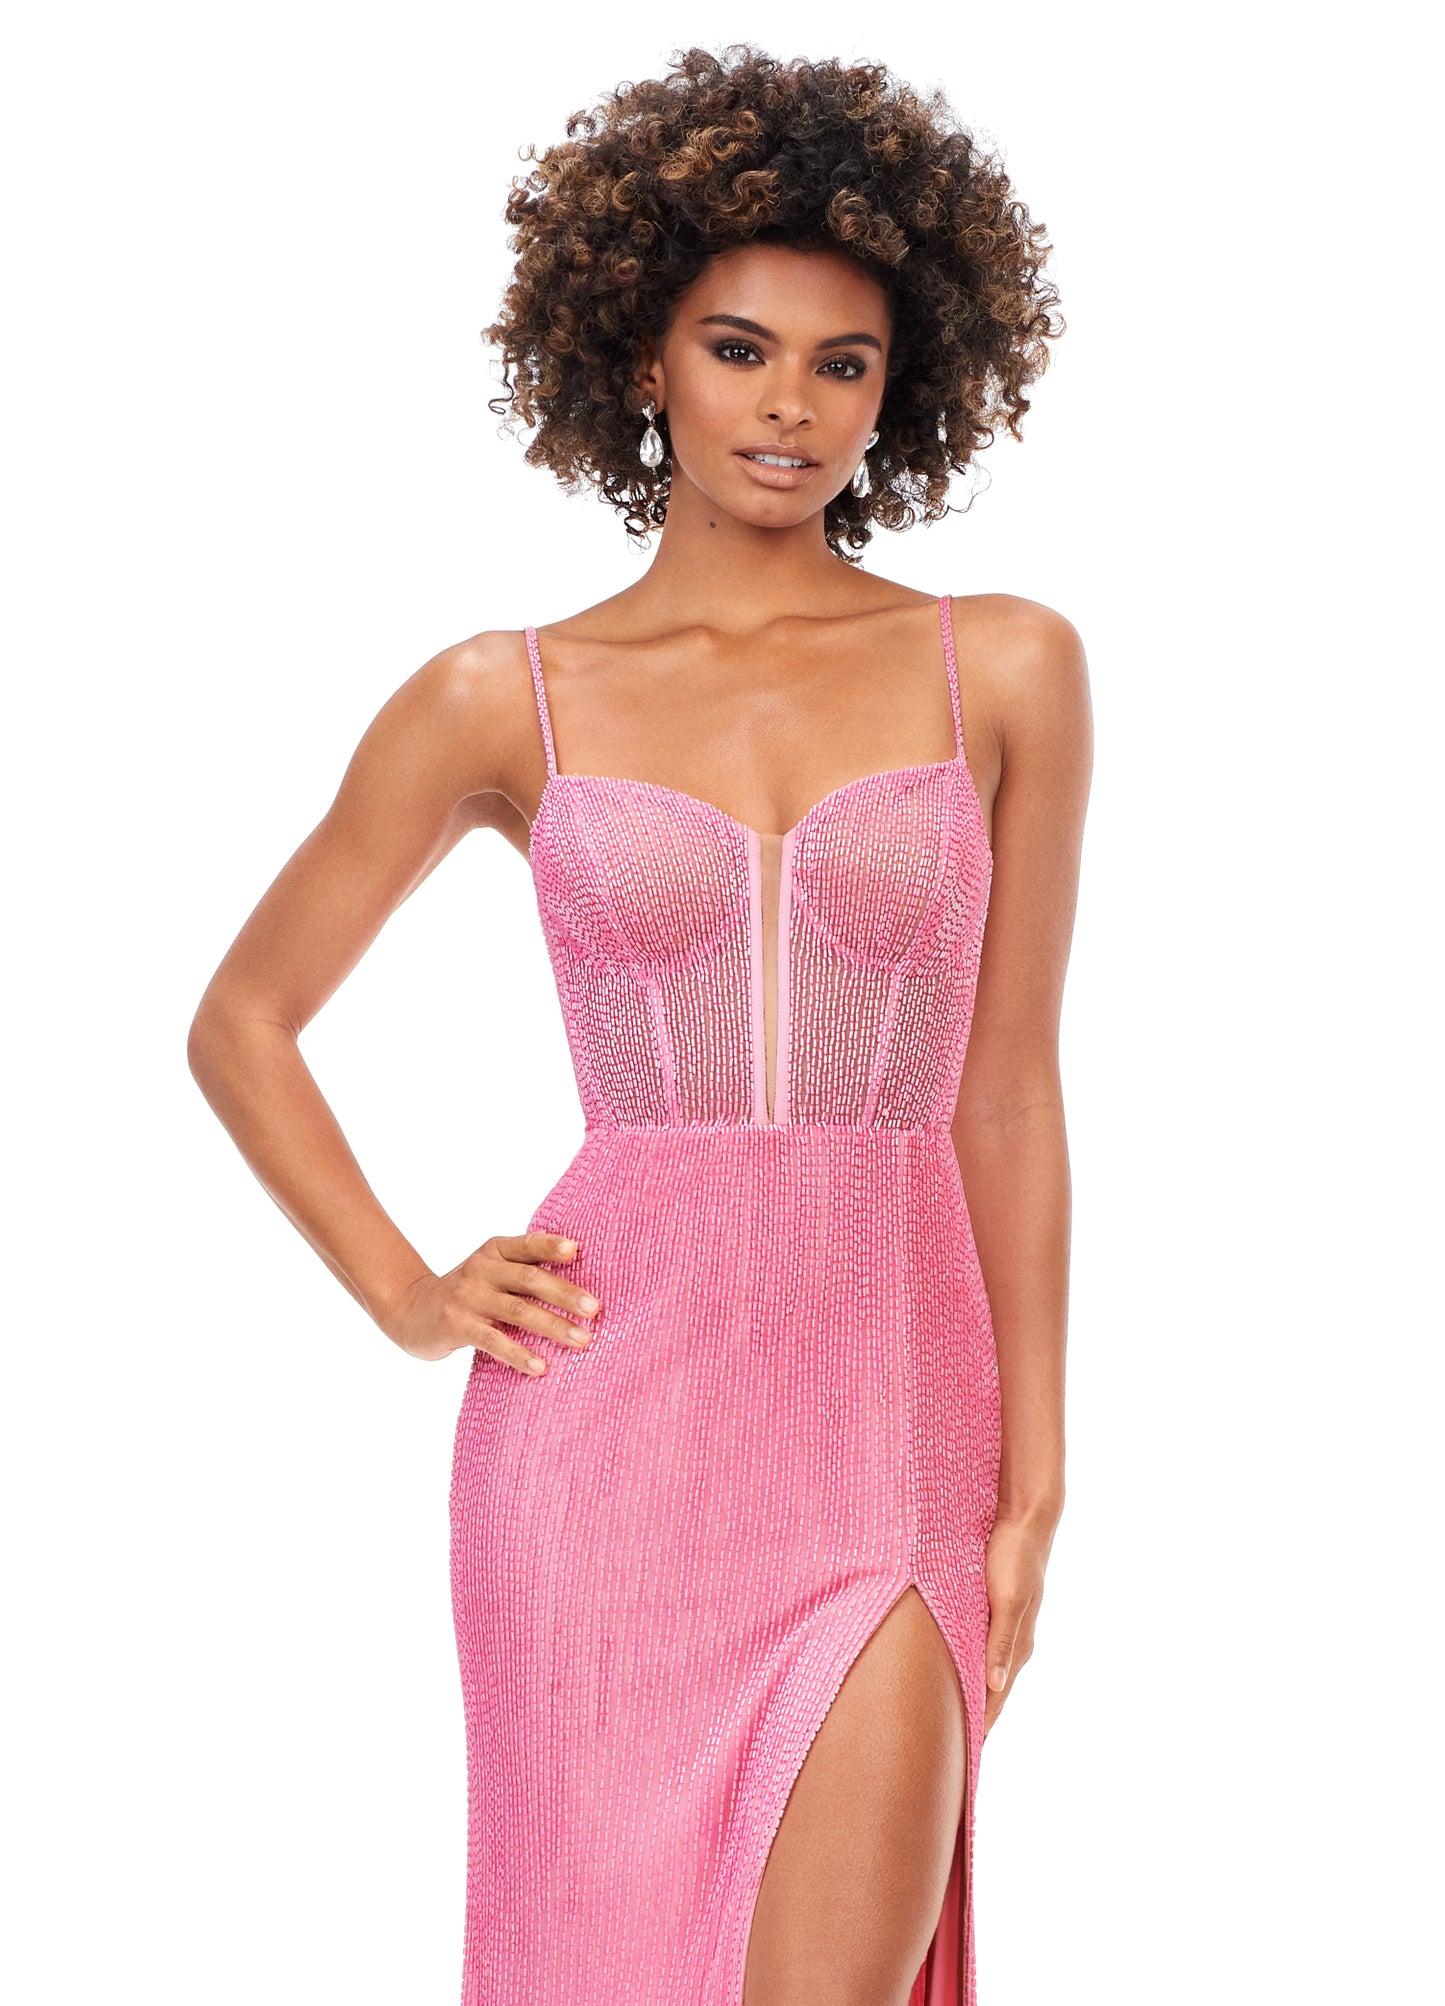 Ashley Lauren 11369 This Candy Pink liquid beaded style features an exposed bustier that is sure to accentuate your curves. The look is complete with sweep train and left leg slit.